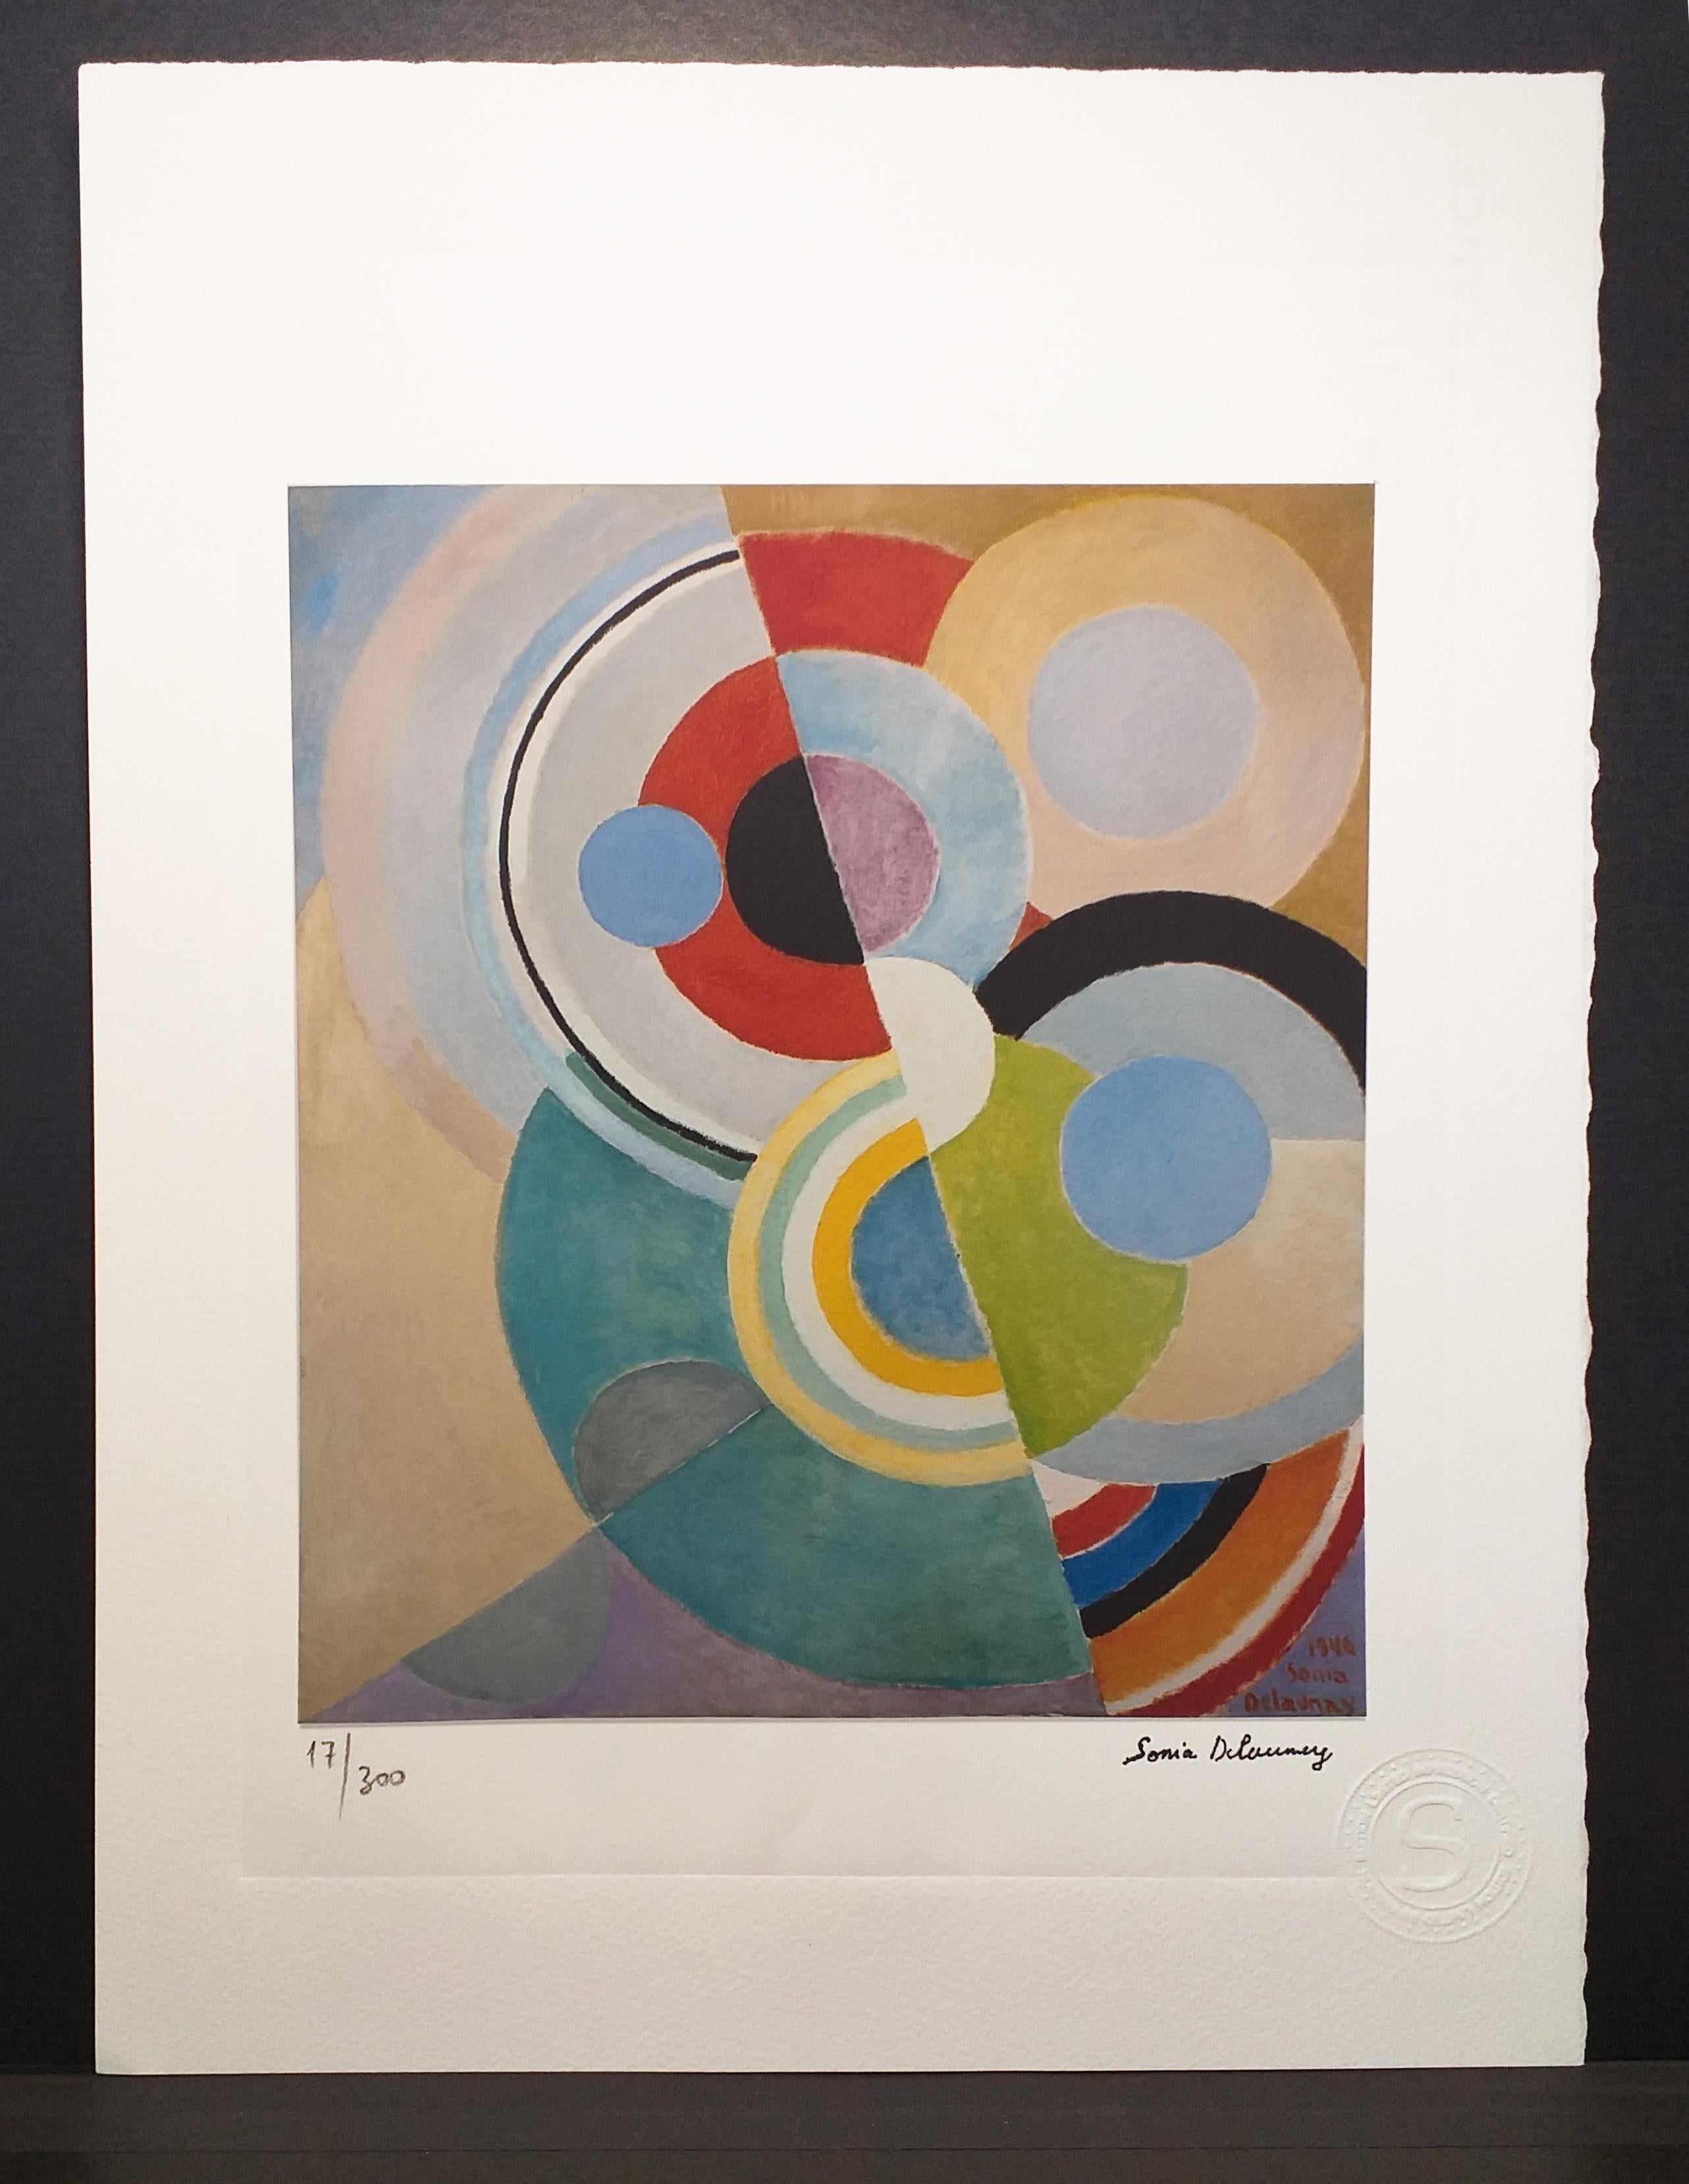 Sonia Delaunay
1885 - 1979
This artist is mainly known for her colourful patchworks, which she used in painting, tapestry, design and fashion. However, she was also an accomplished painter in search of the expression of pure painting. She